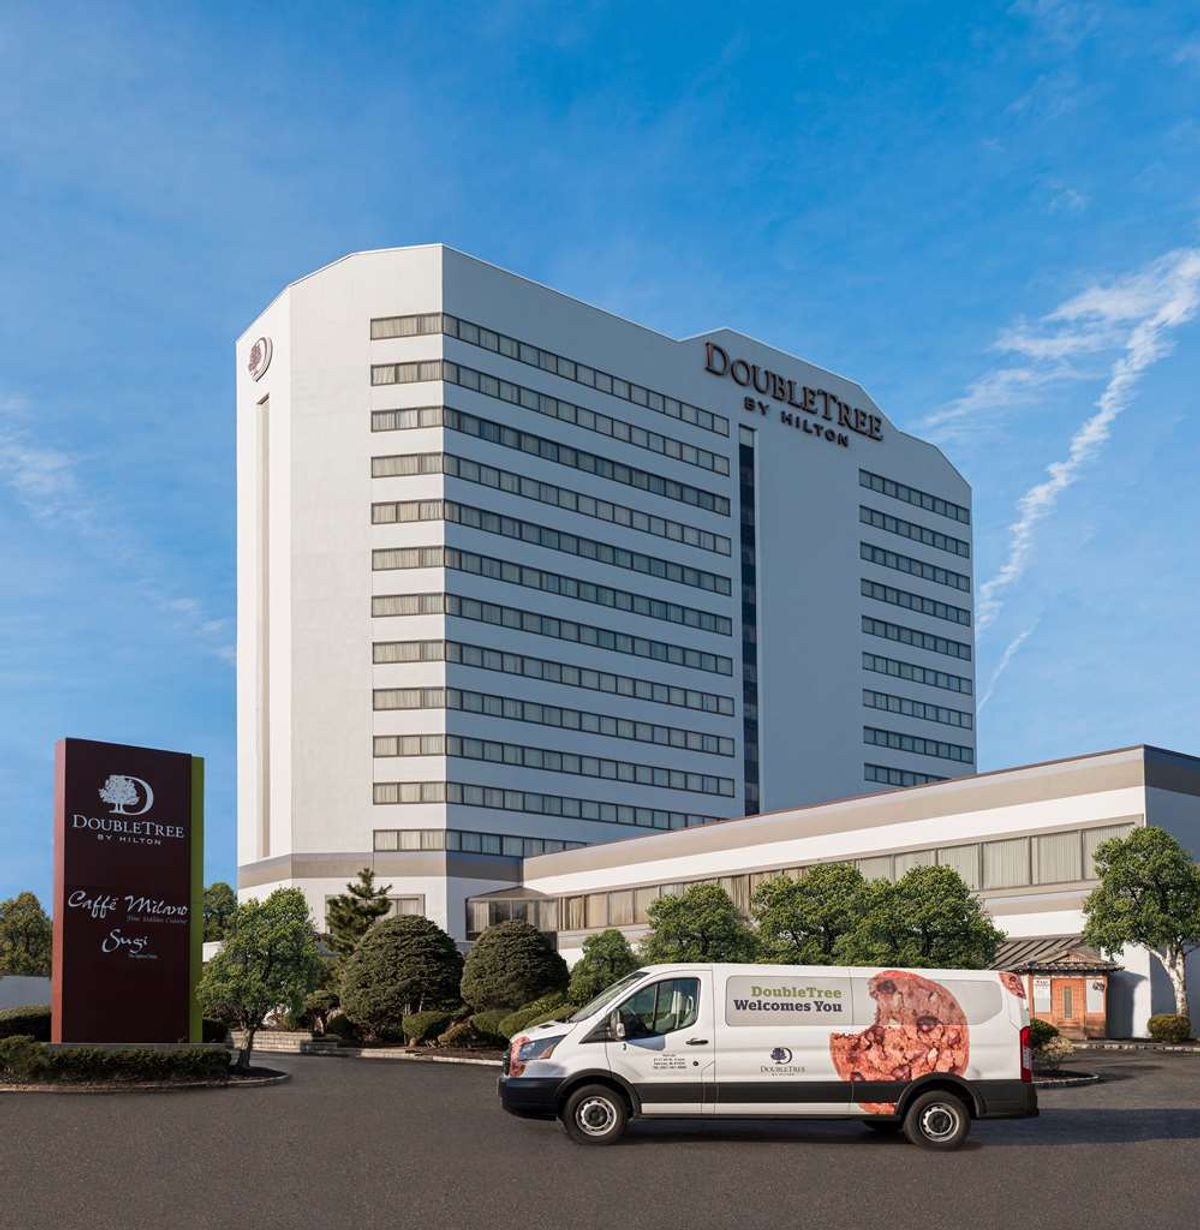 Doubletree Hotel- First Class Fort Lee, NJ Hotels- GDS Reservation Codes:  Travel Weekly